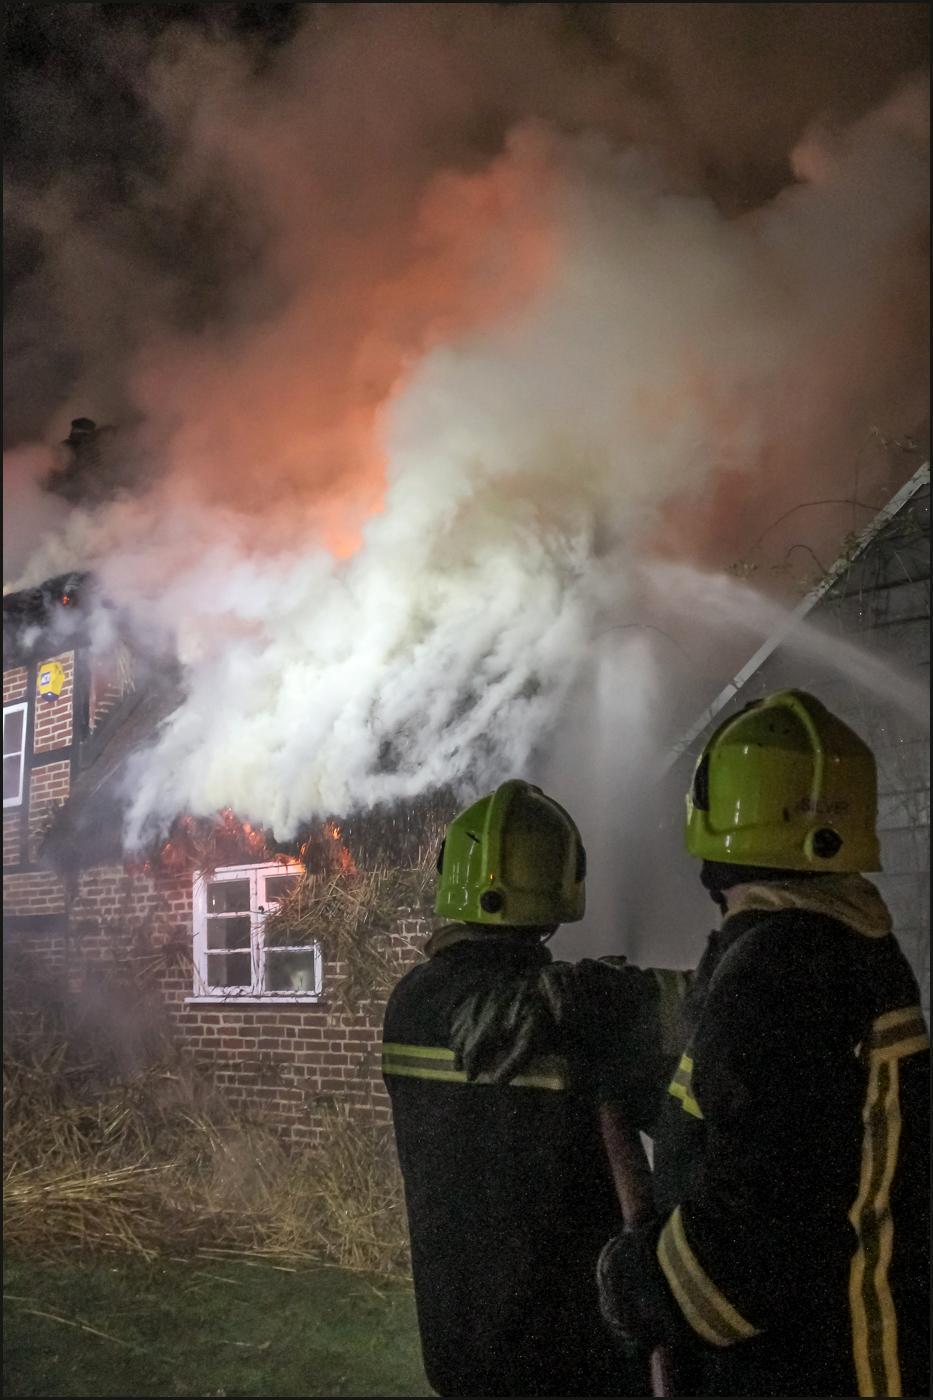 Fire crews from Hampshire and Dorset tackled a major blaze at a thatched cottage in Sopley.